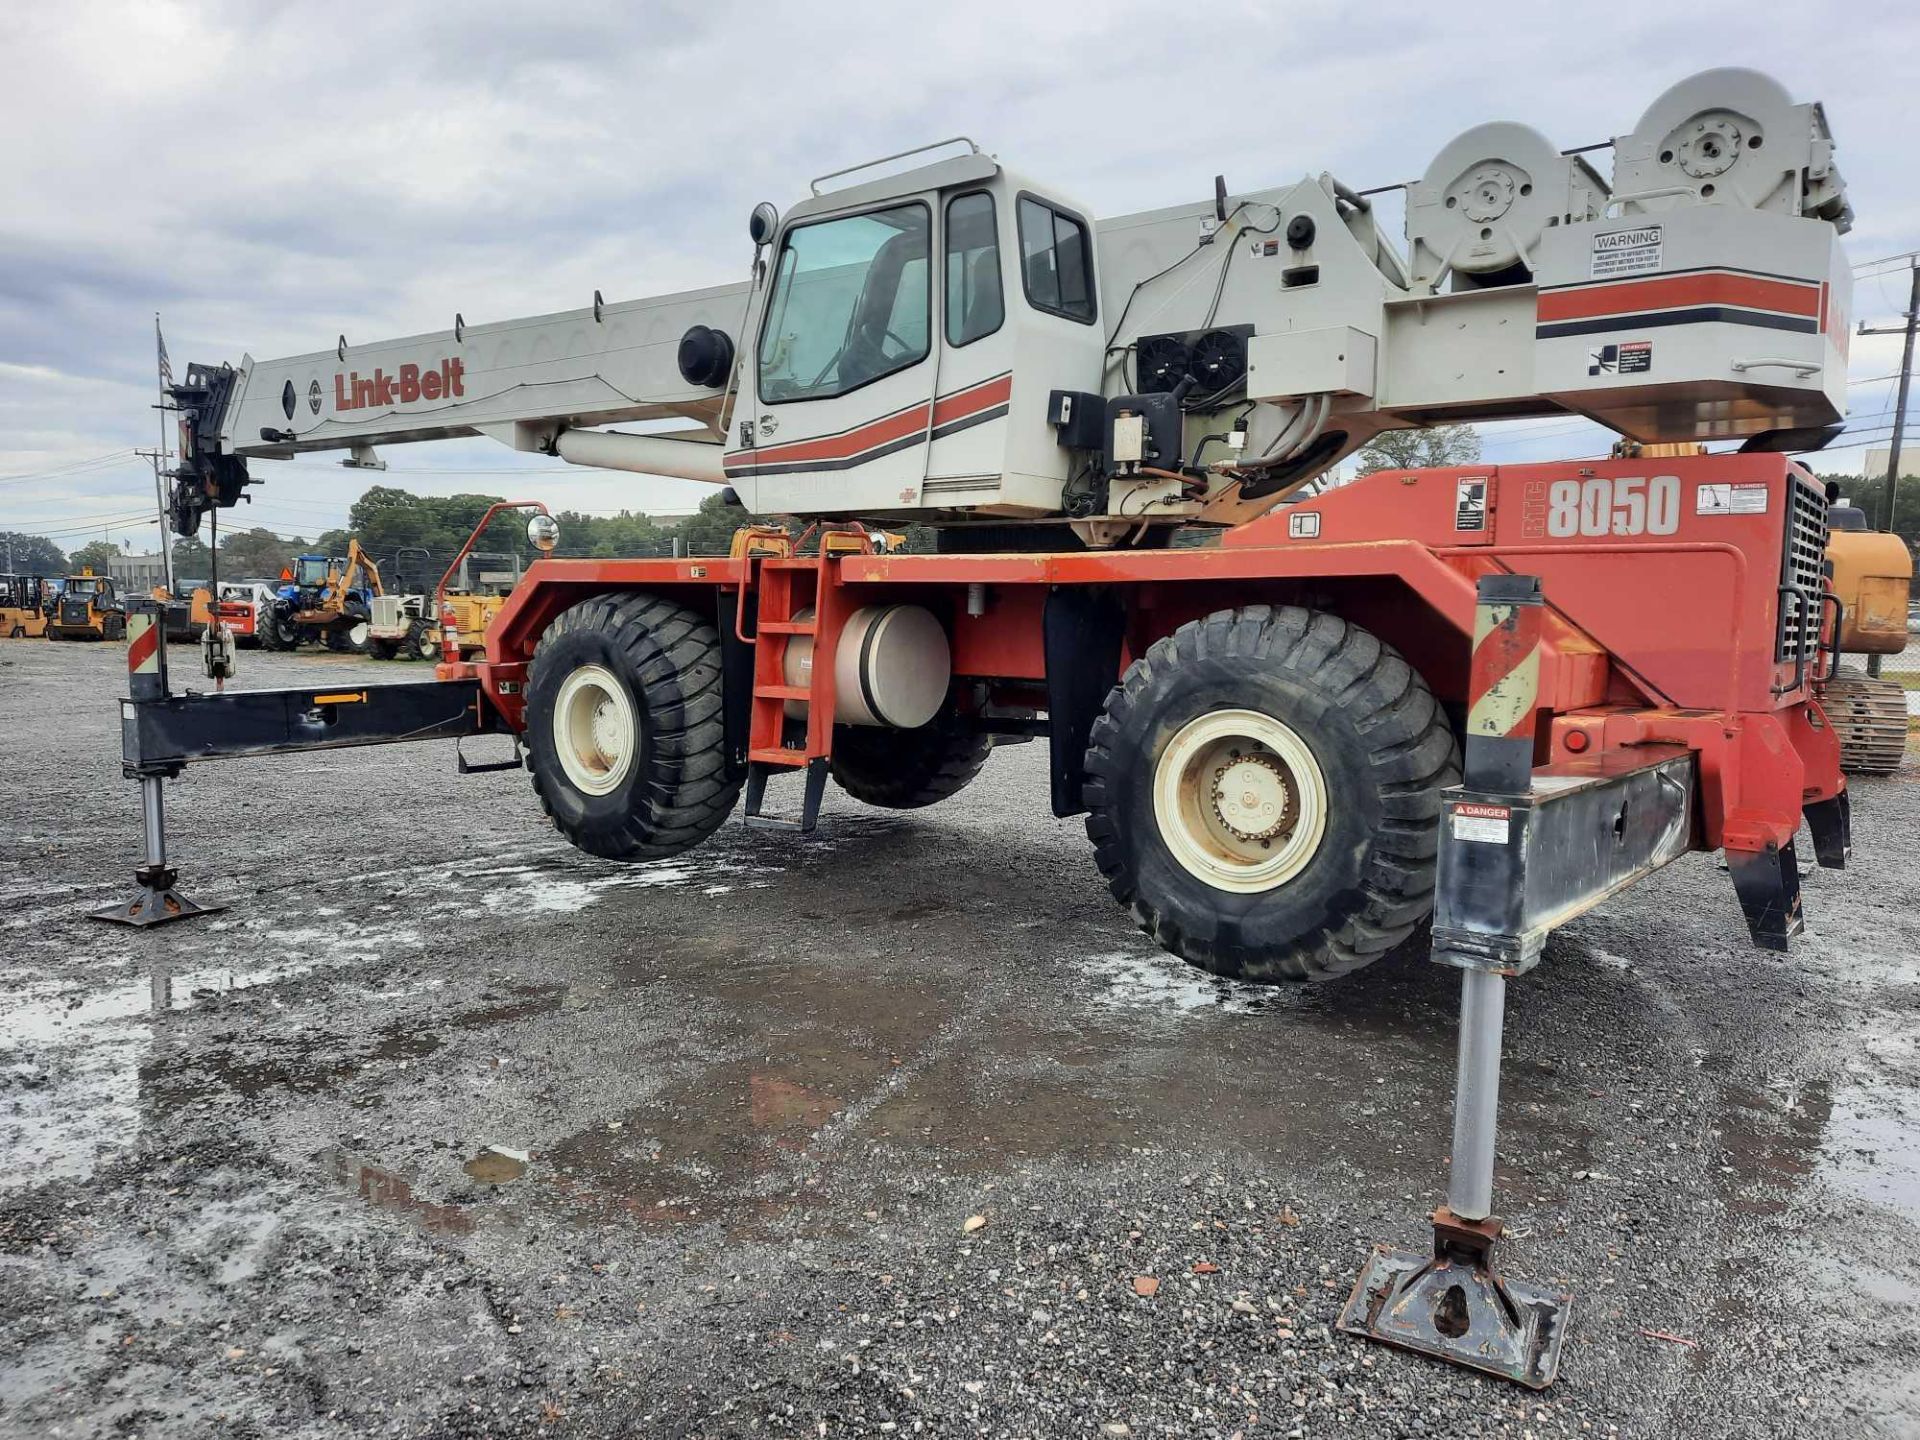 (SUBJECT TO OWNER CONFIRMATION) 2007 Link-Belt RTC8050 Series II Rough Terrain Crane - Image 4 of 78